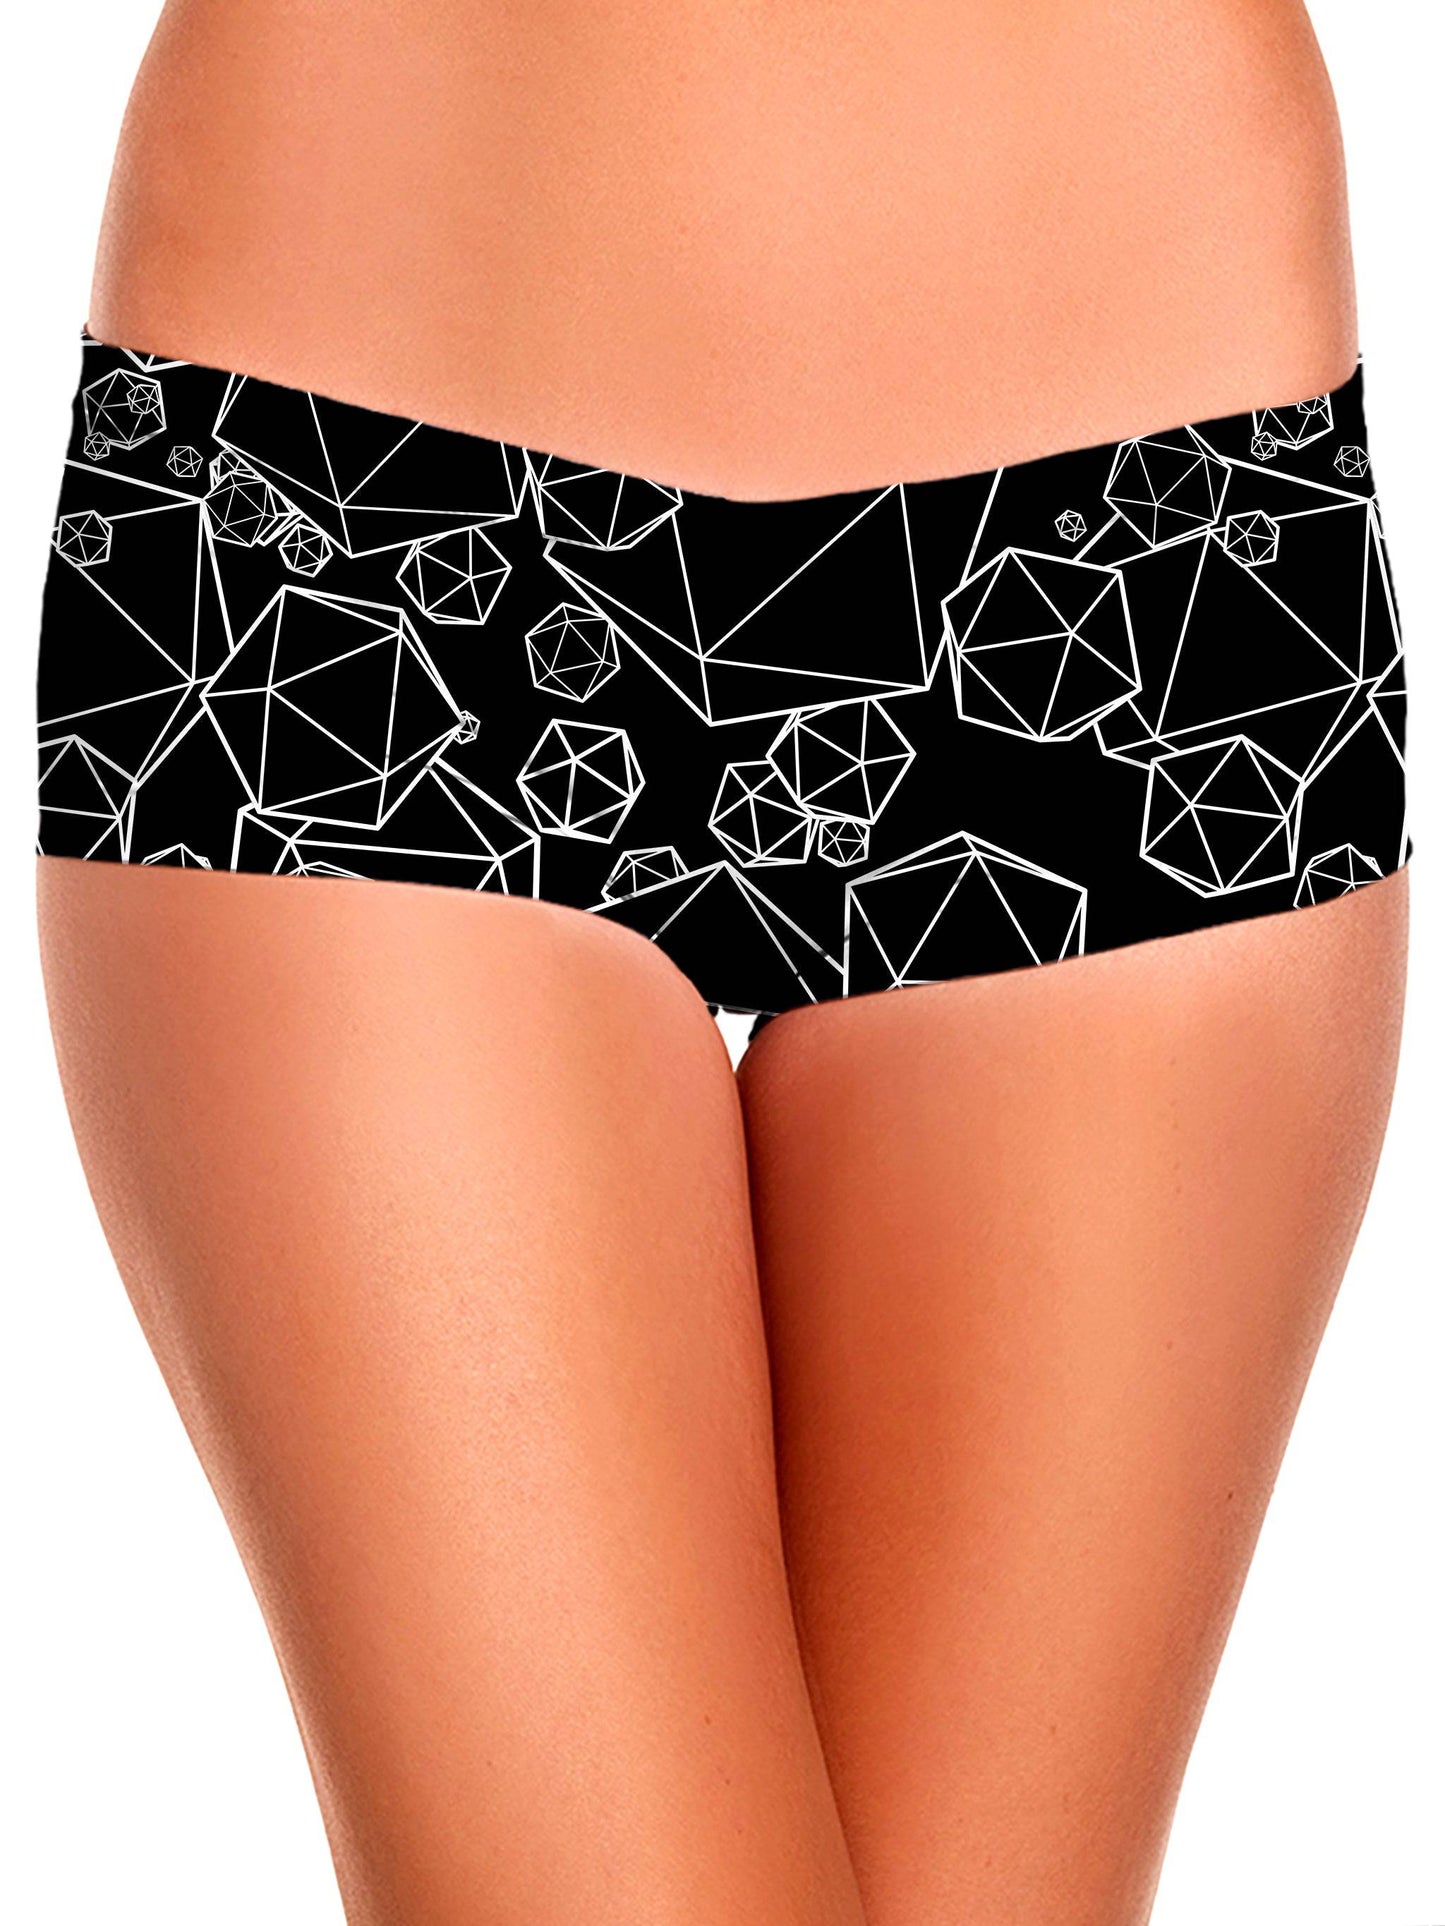 Icosahedron Madness Black Crop Top and Booty Shorts Combo, Yantrart Design, | iEDM